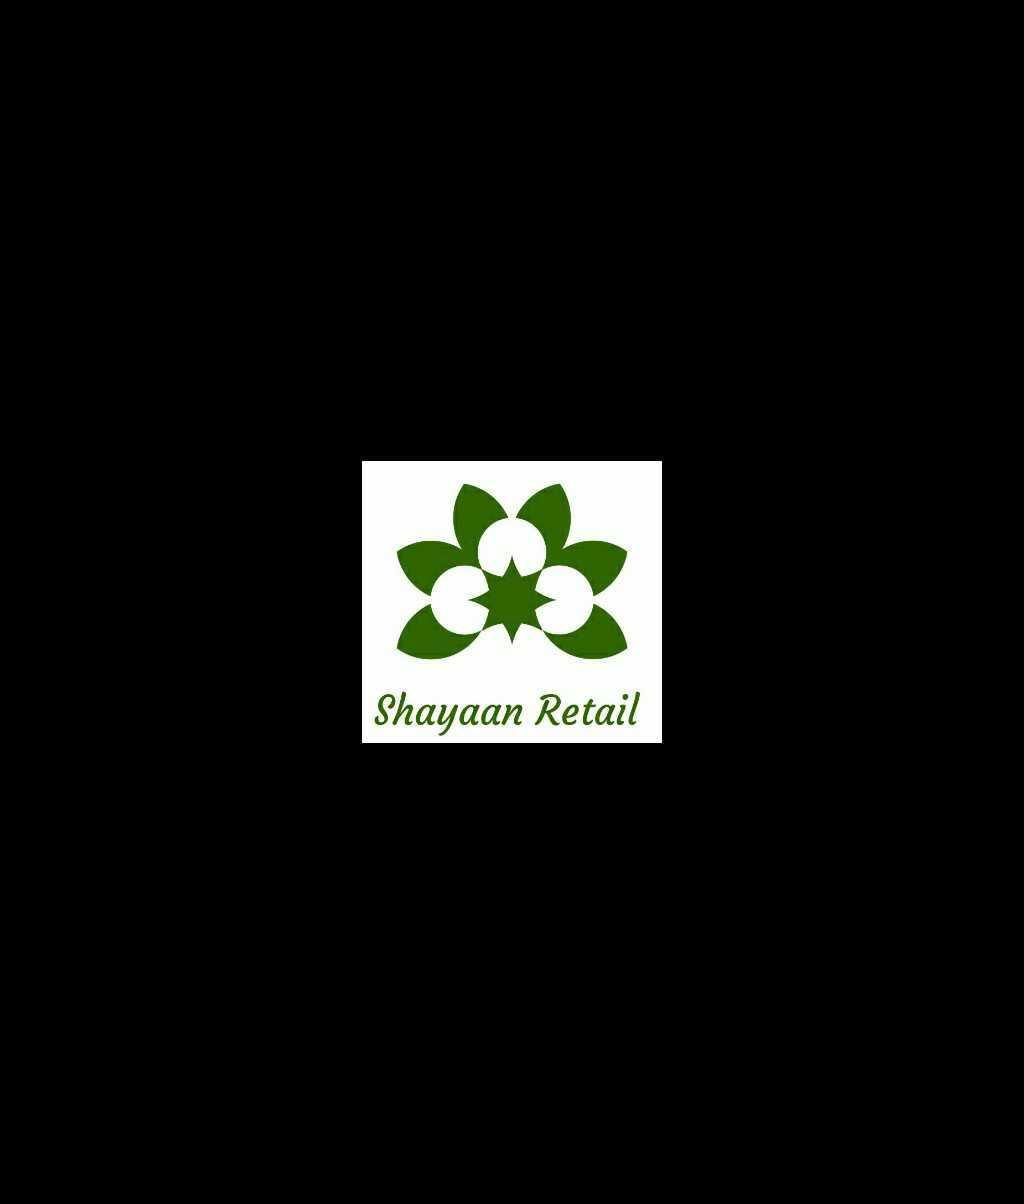 Shayaan Retail Management Services